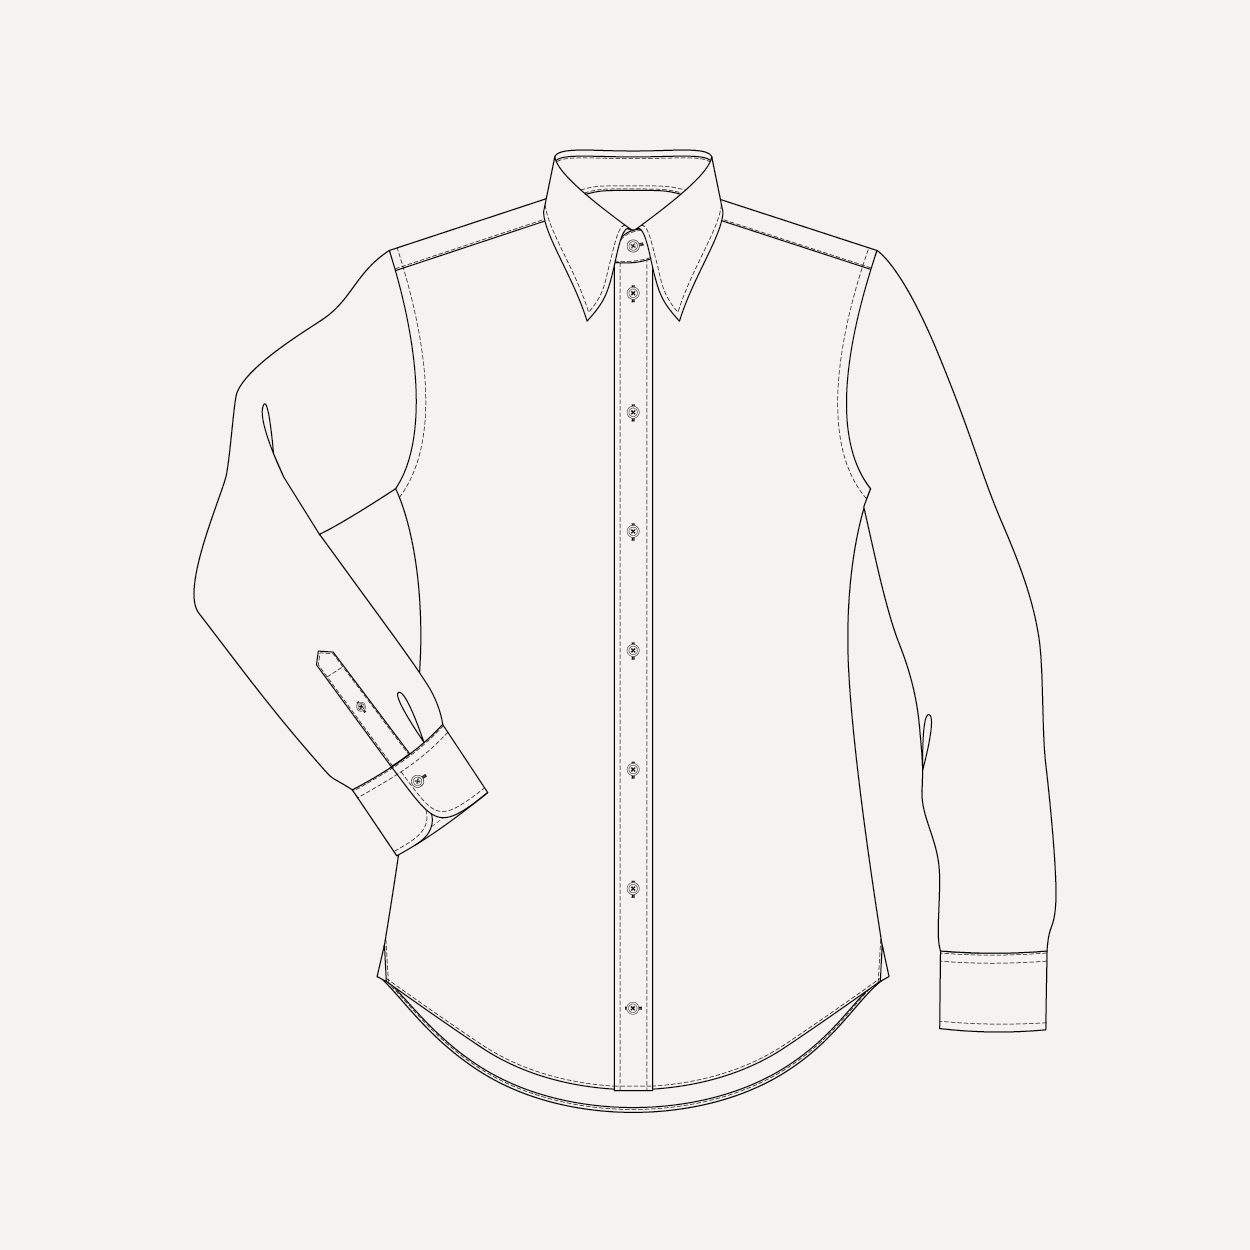 How To Draw A Dress Shirt Then draw the basic form of the dress